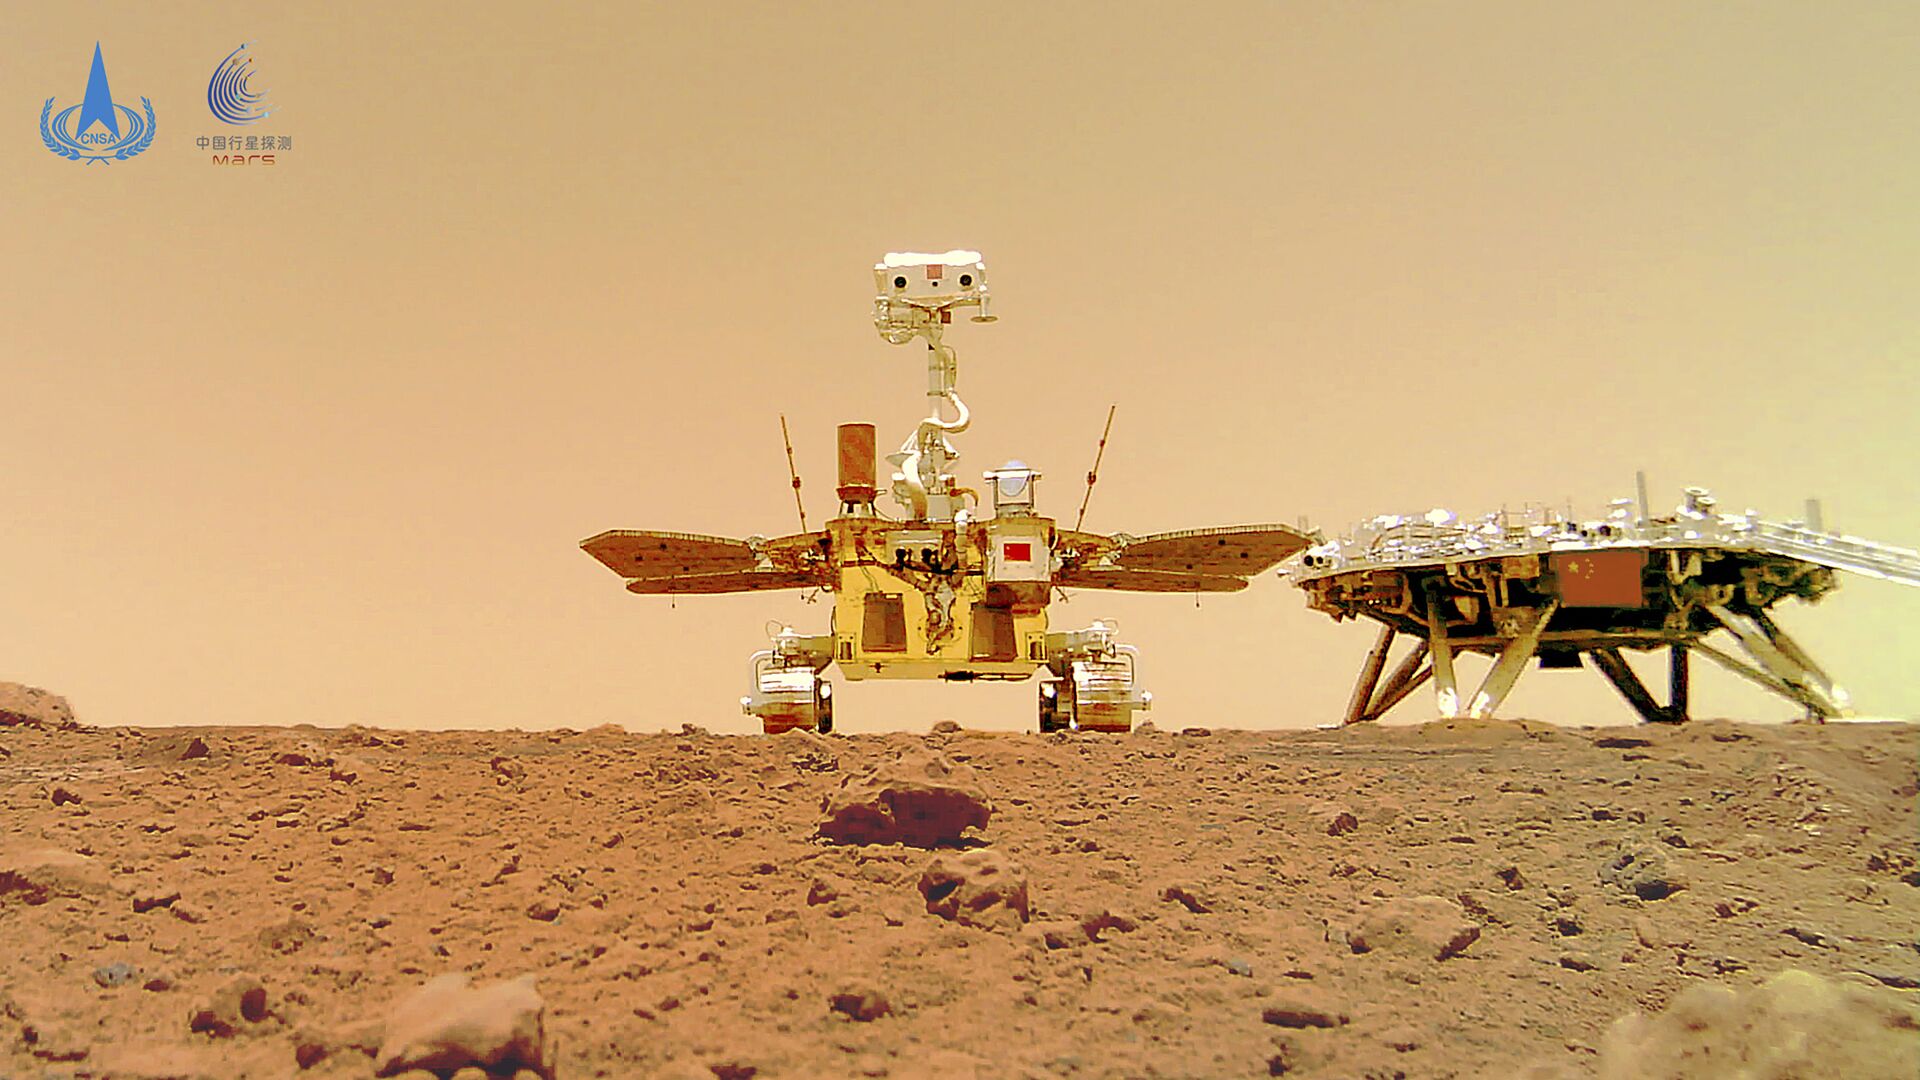 In this image released by the China National Space Administration (CNSA) on Friday, June 11, 2021, the Chinese Mars rover Zhurong is seen near its landing platform taken by a remote camera that was dropped into position by the rover. - Sputnik International, 1920, 29.01.2022